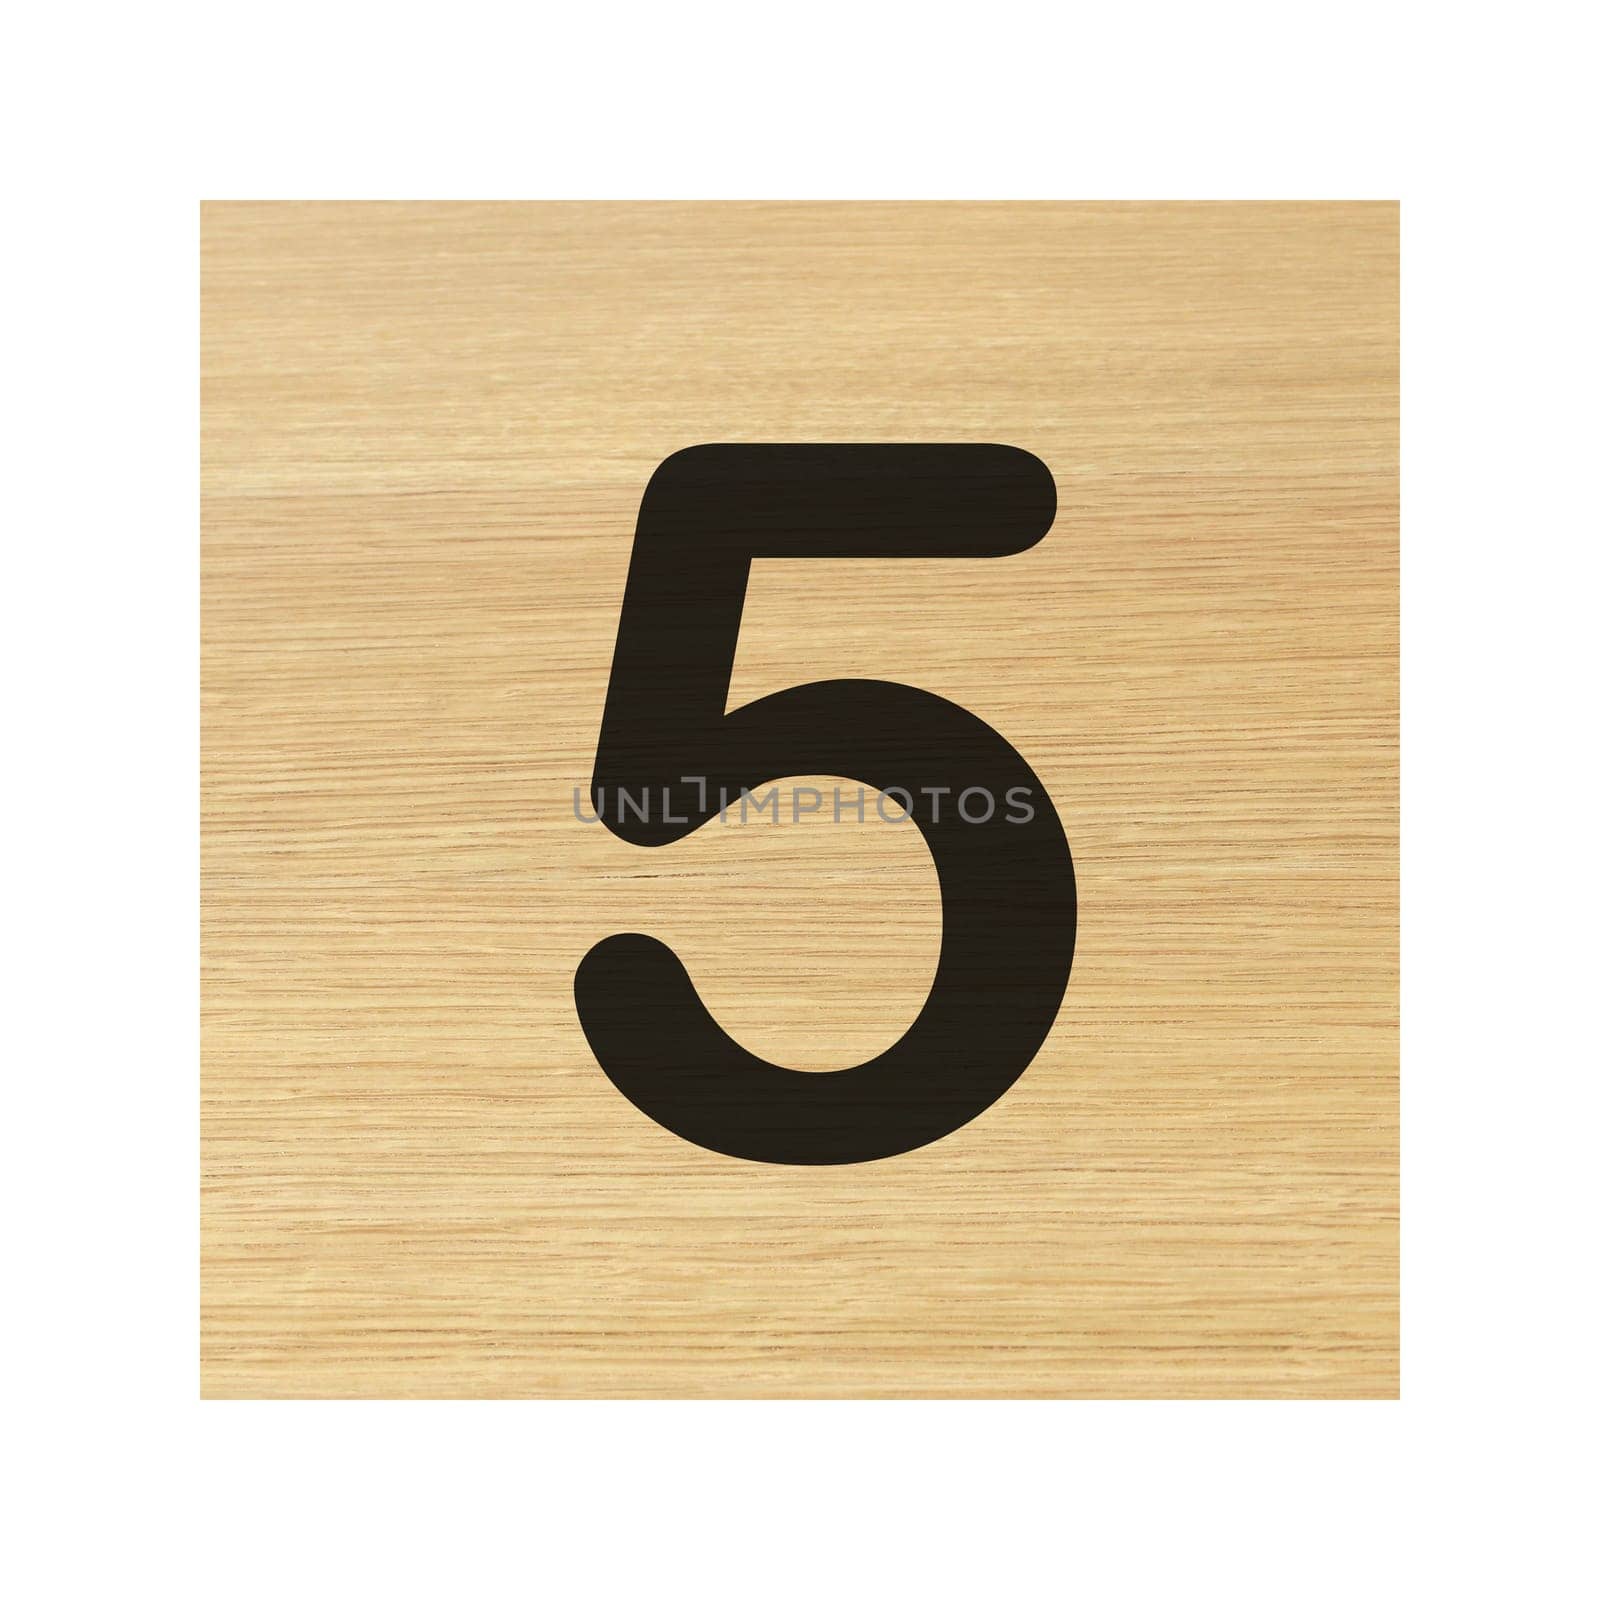 A Five 5 wood block on white with clipping path